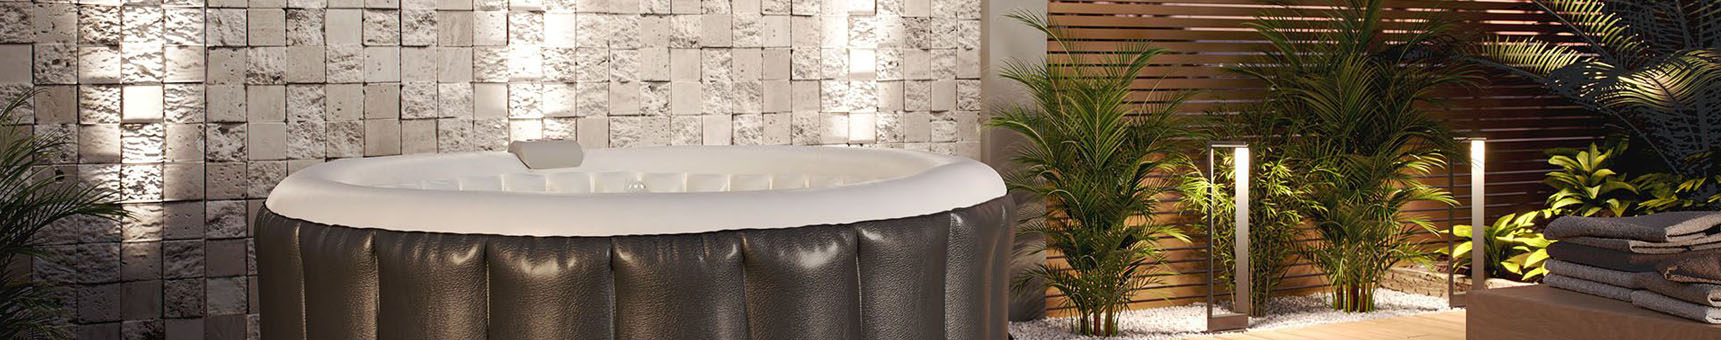 Outdoor Whirlpools - Farbe